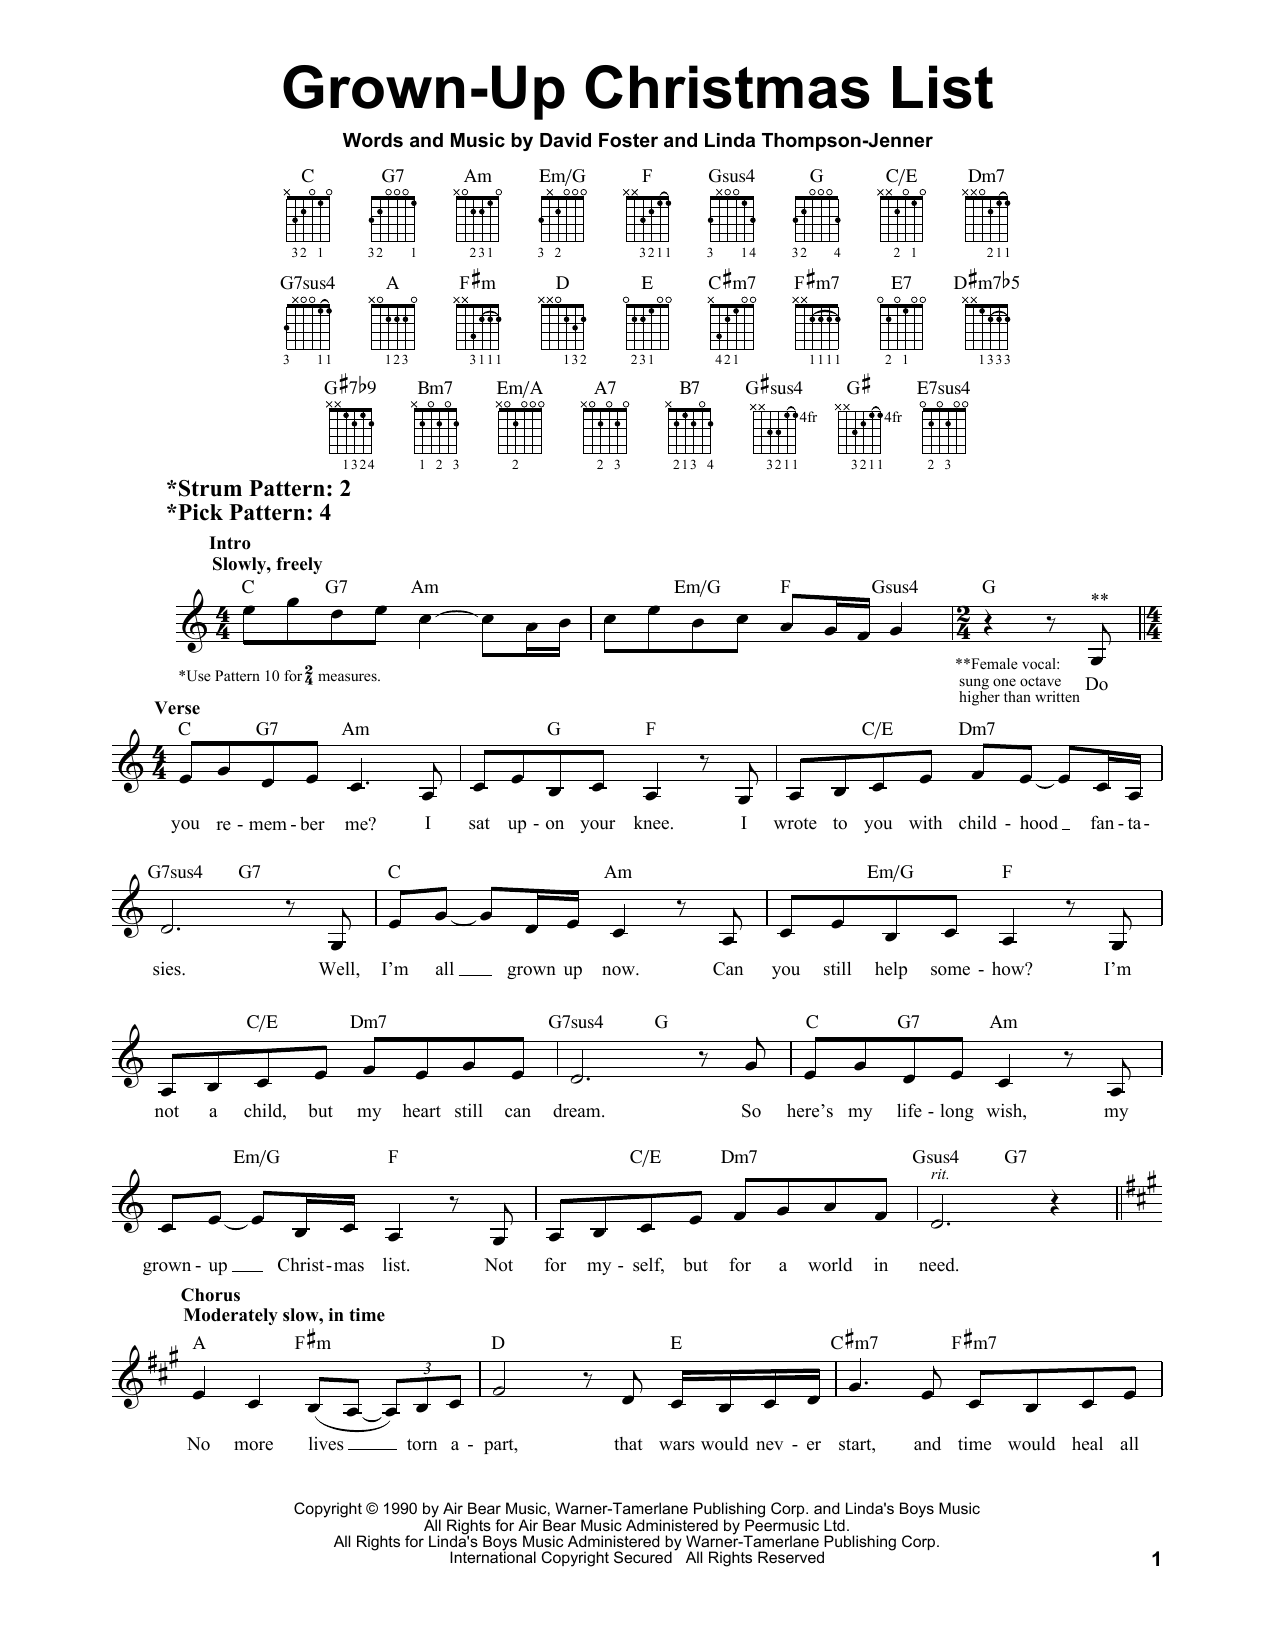 Amy Grant Grown-Up Christmas List sheet music notes and chords. Download Printable PDF.